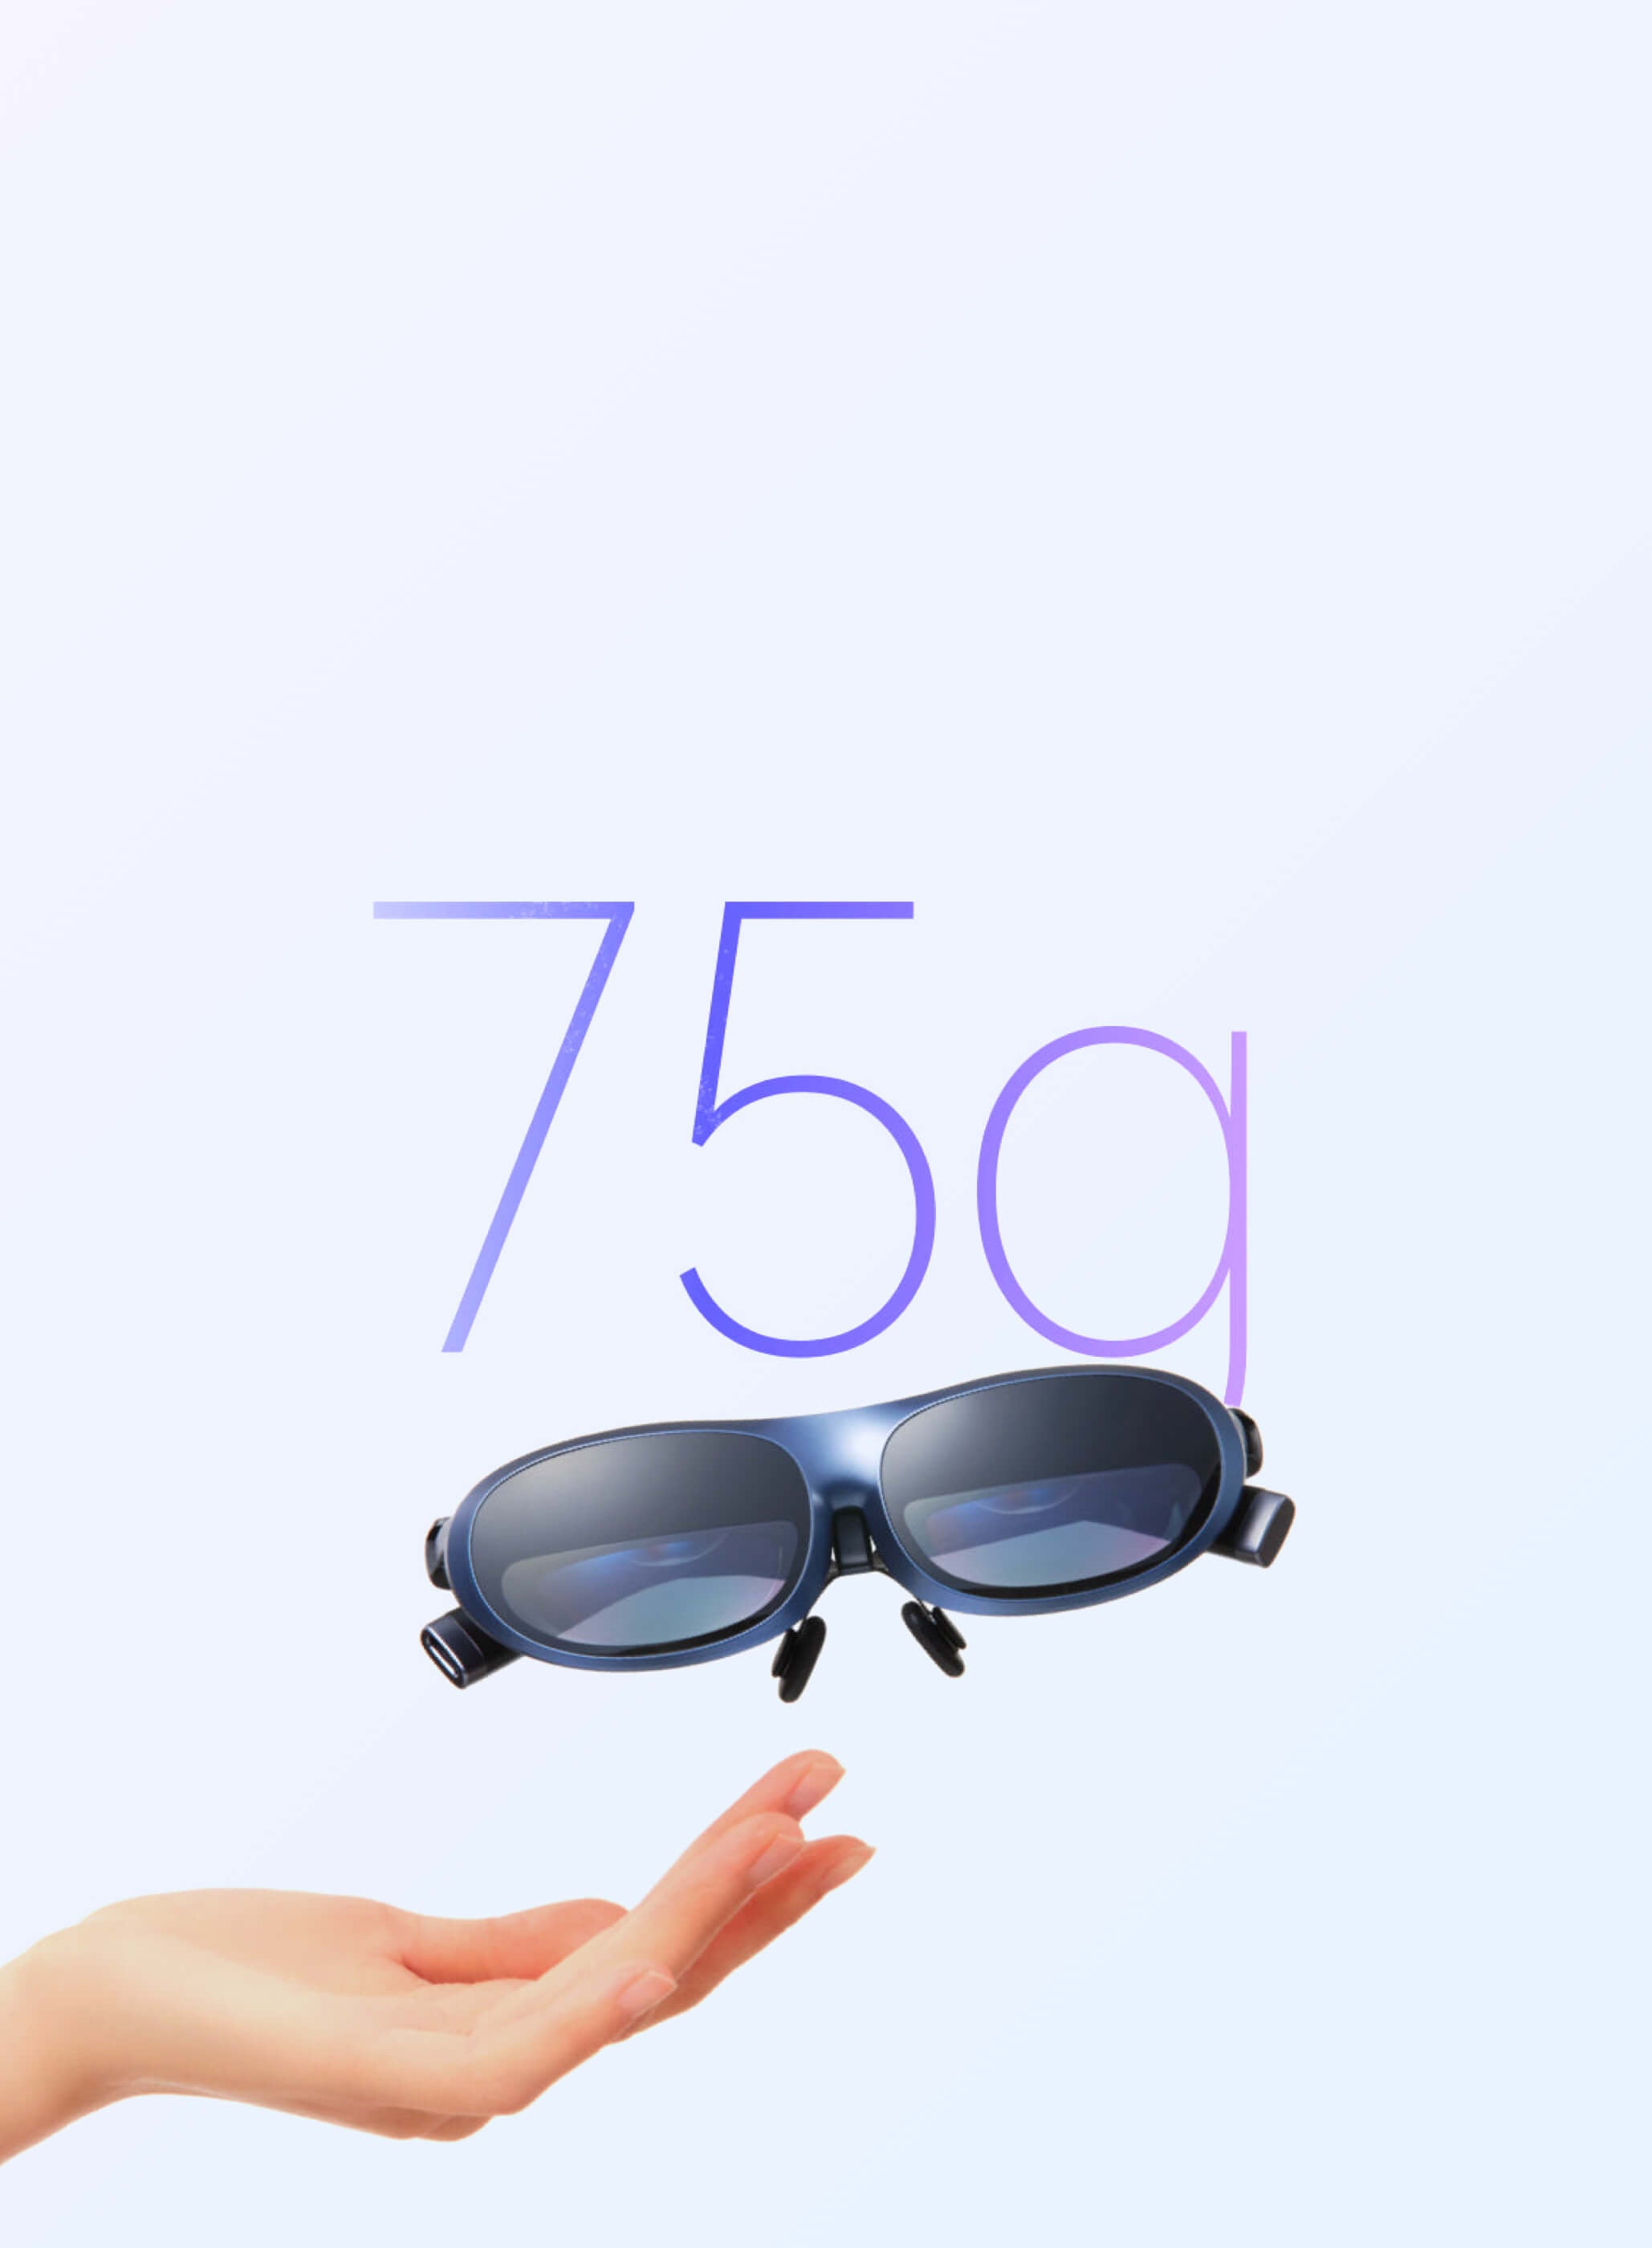 Rokid MAX intelligent glasses with 75g in Weight